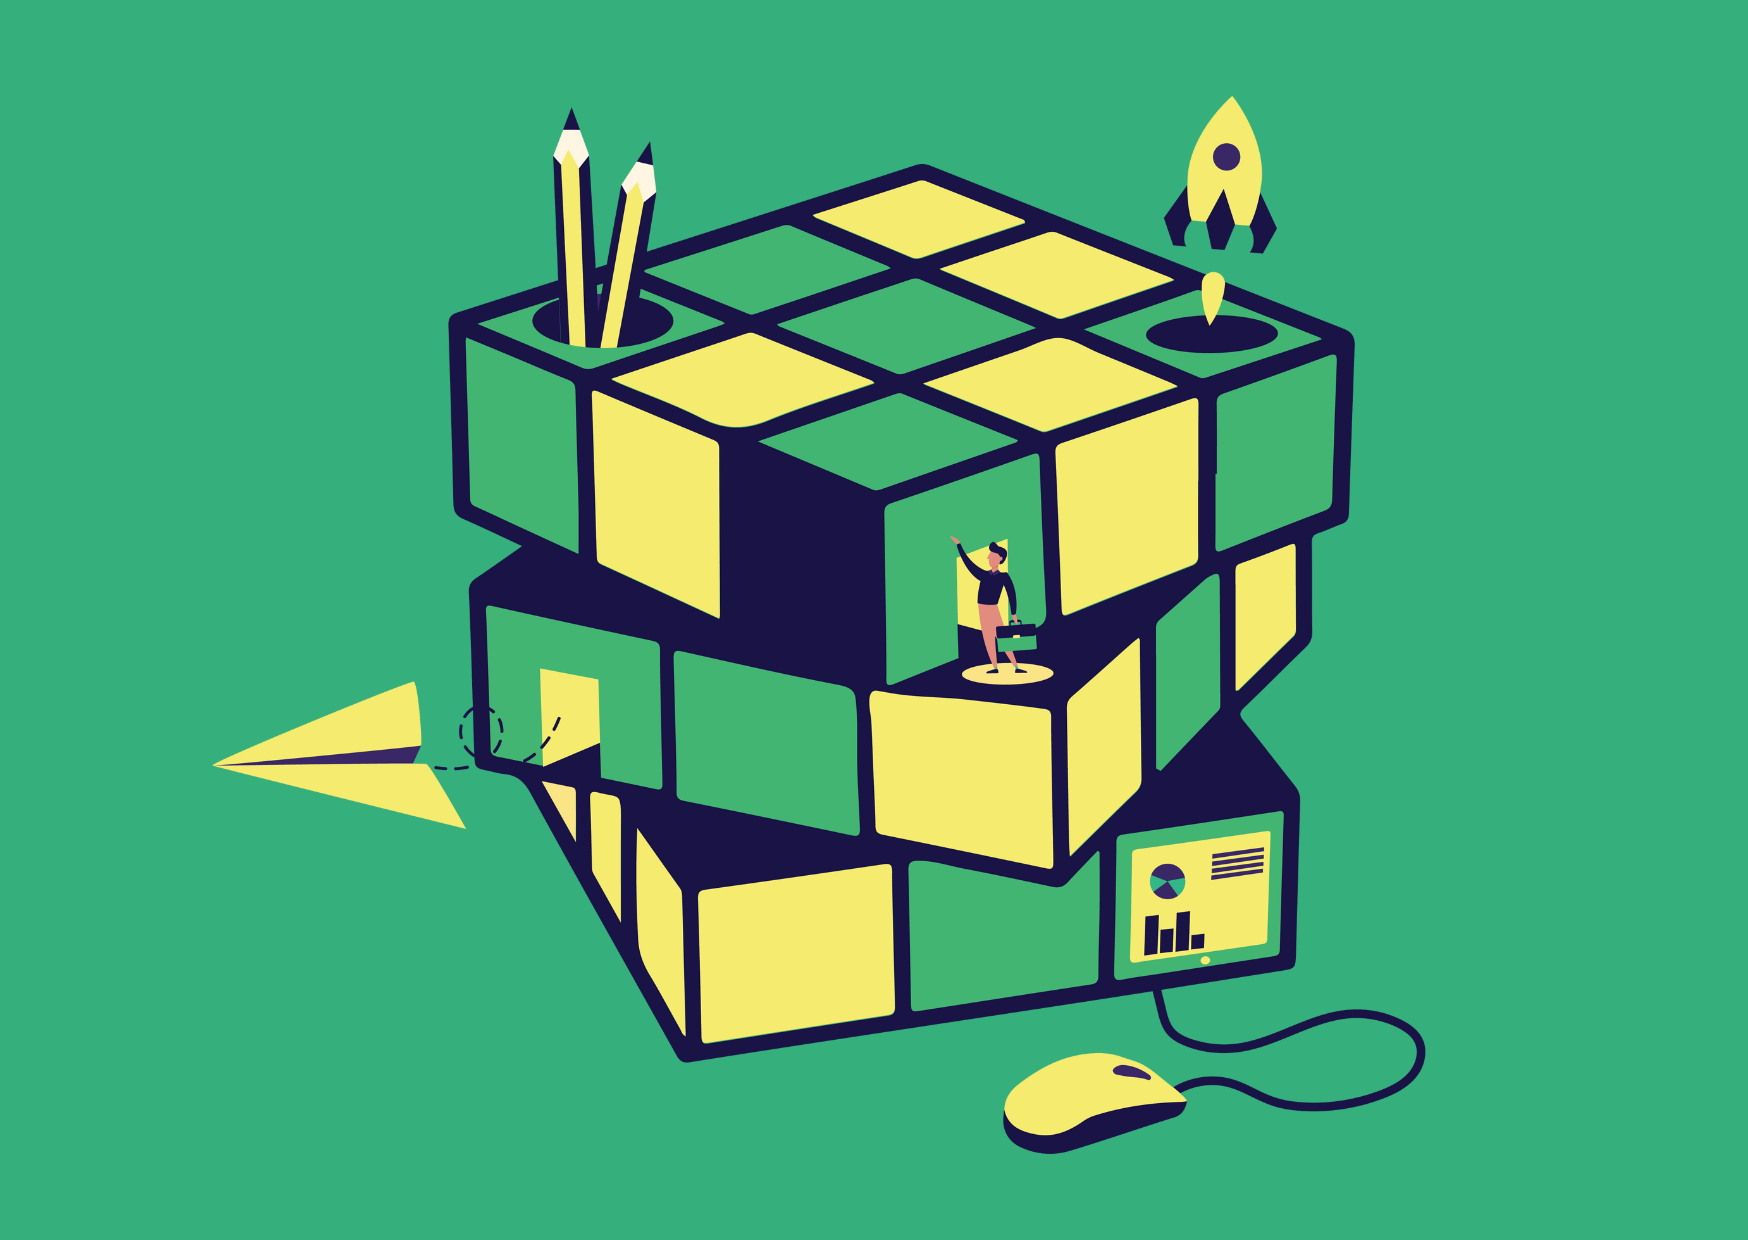 A vector image of a Rubix cube with various work-related tasks on its sides